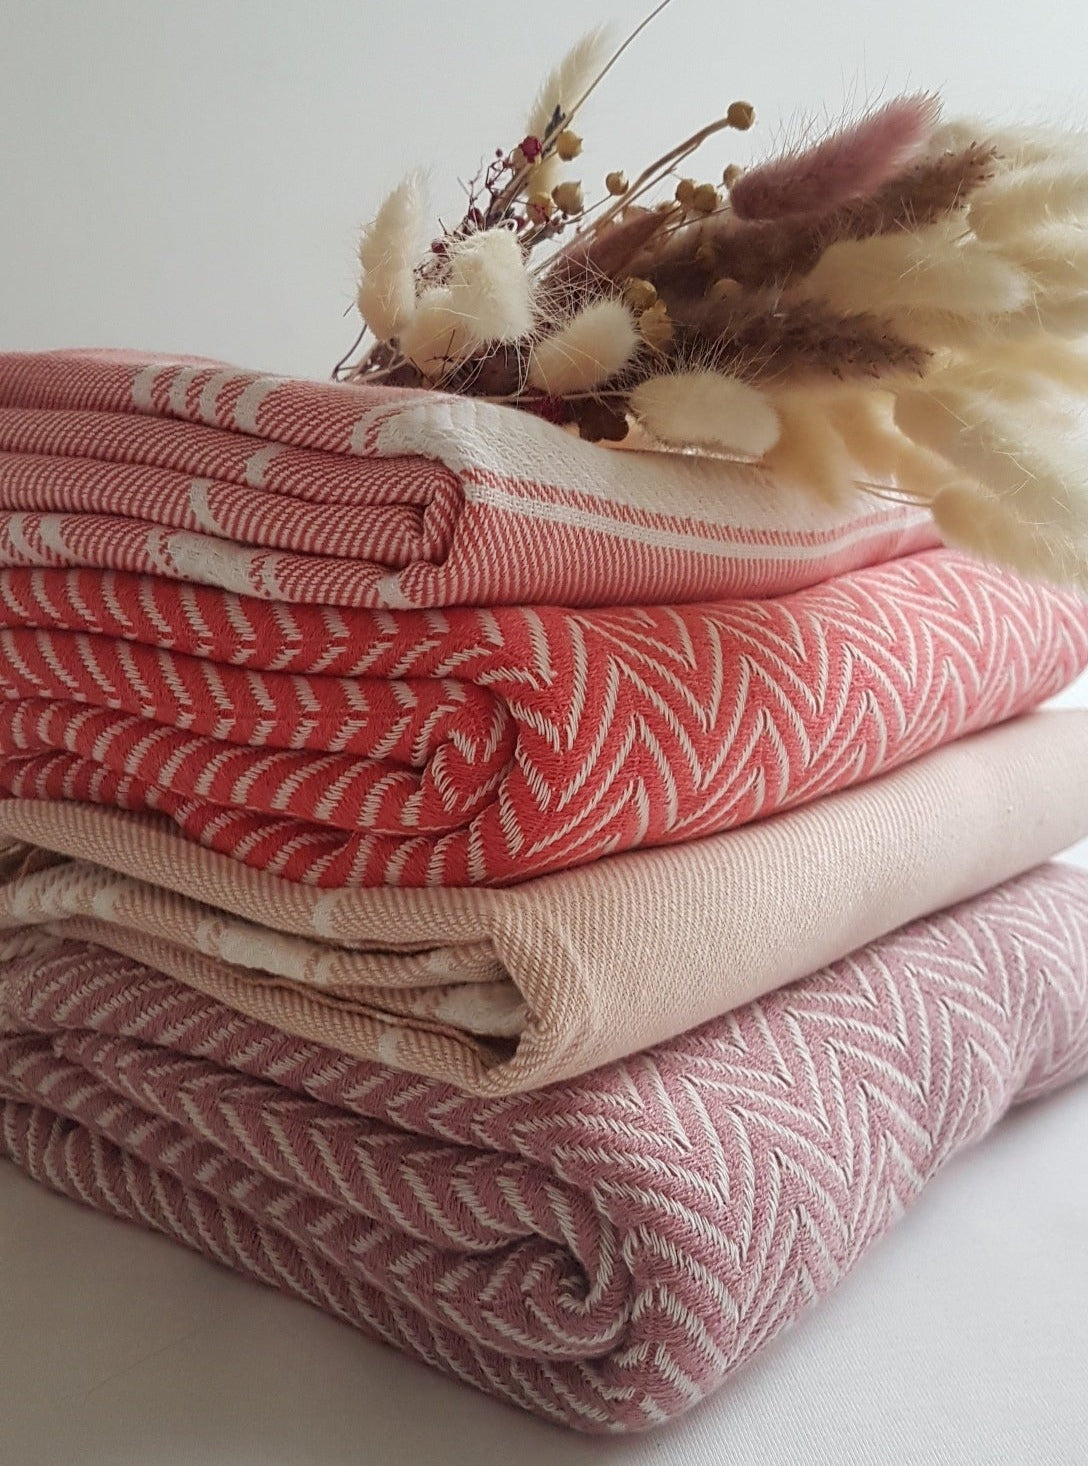 el patito towels and bathrobes turkish cotton towel 100% natural herringbone pattern blanket house warming party gift rose gold peach coral tones